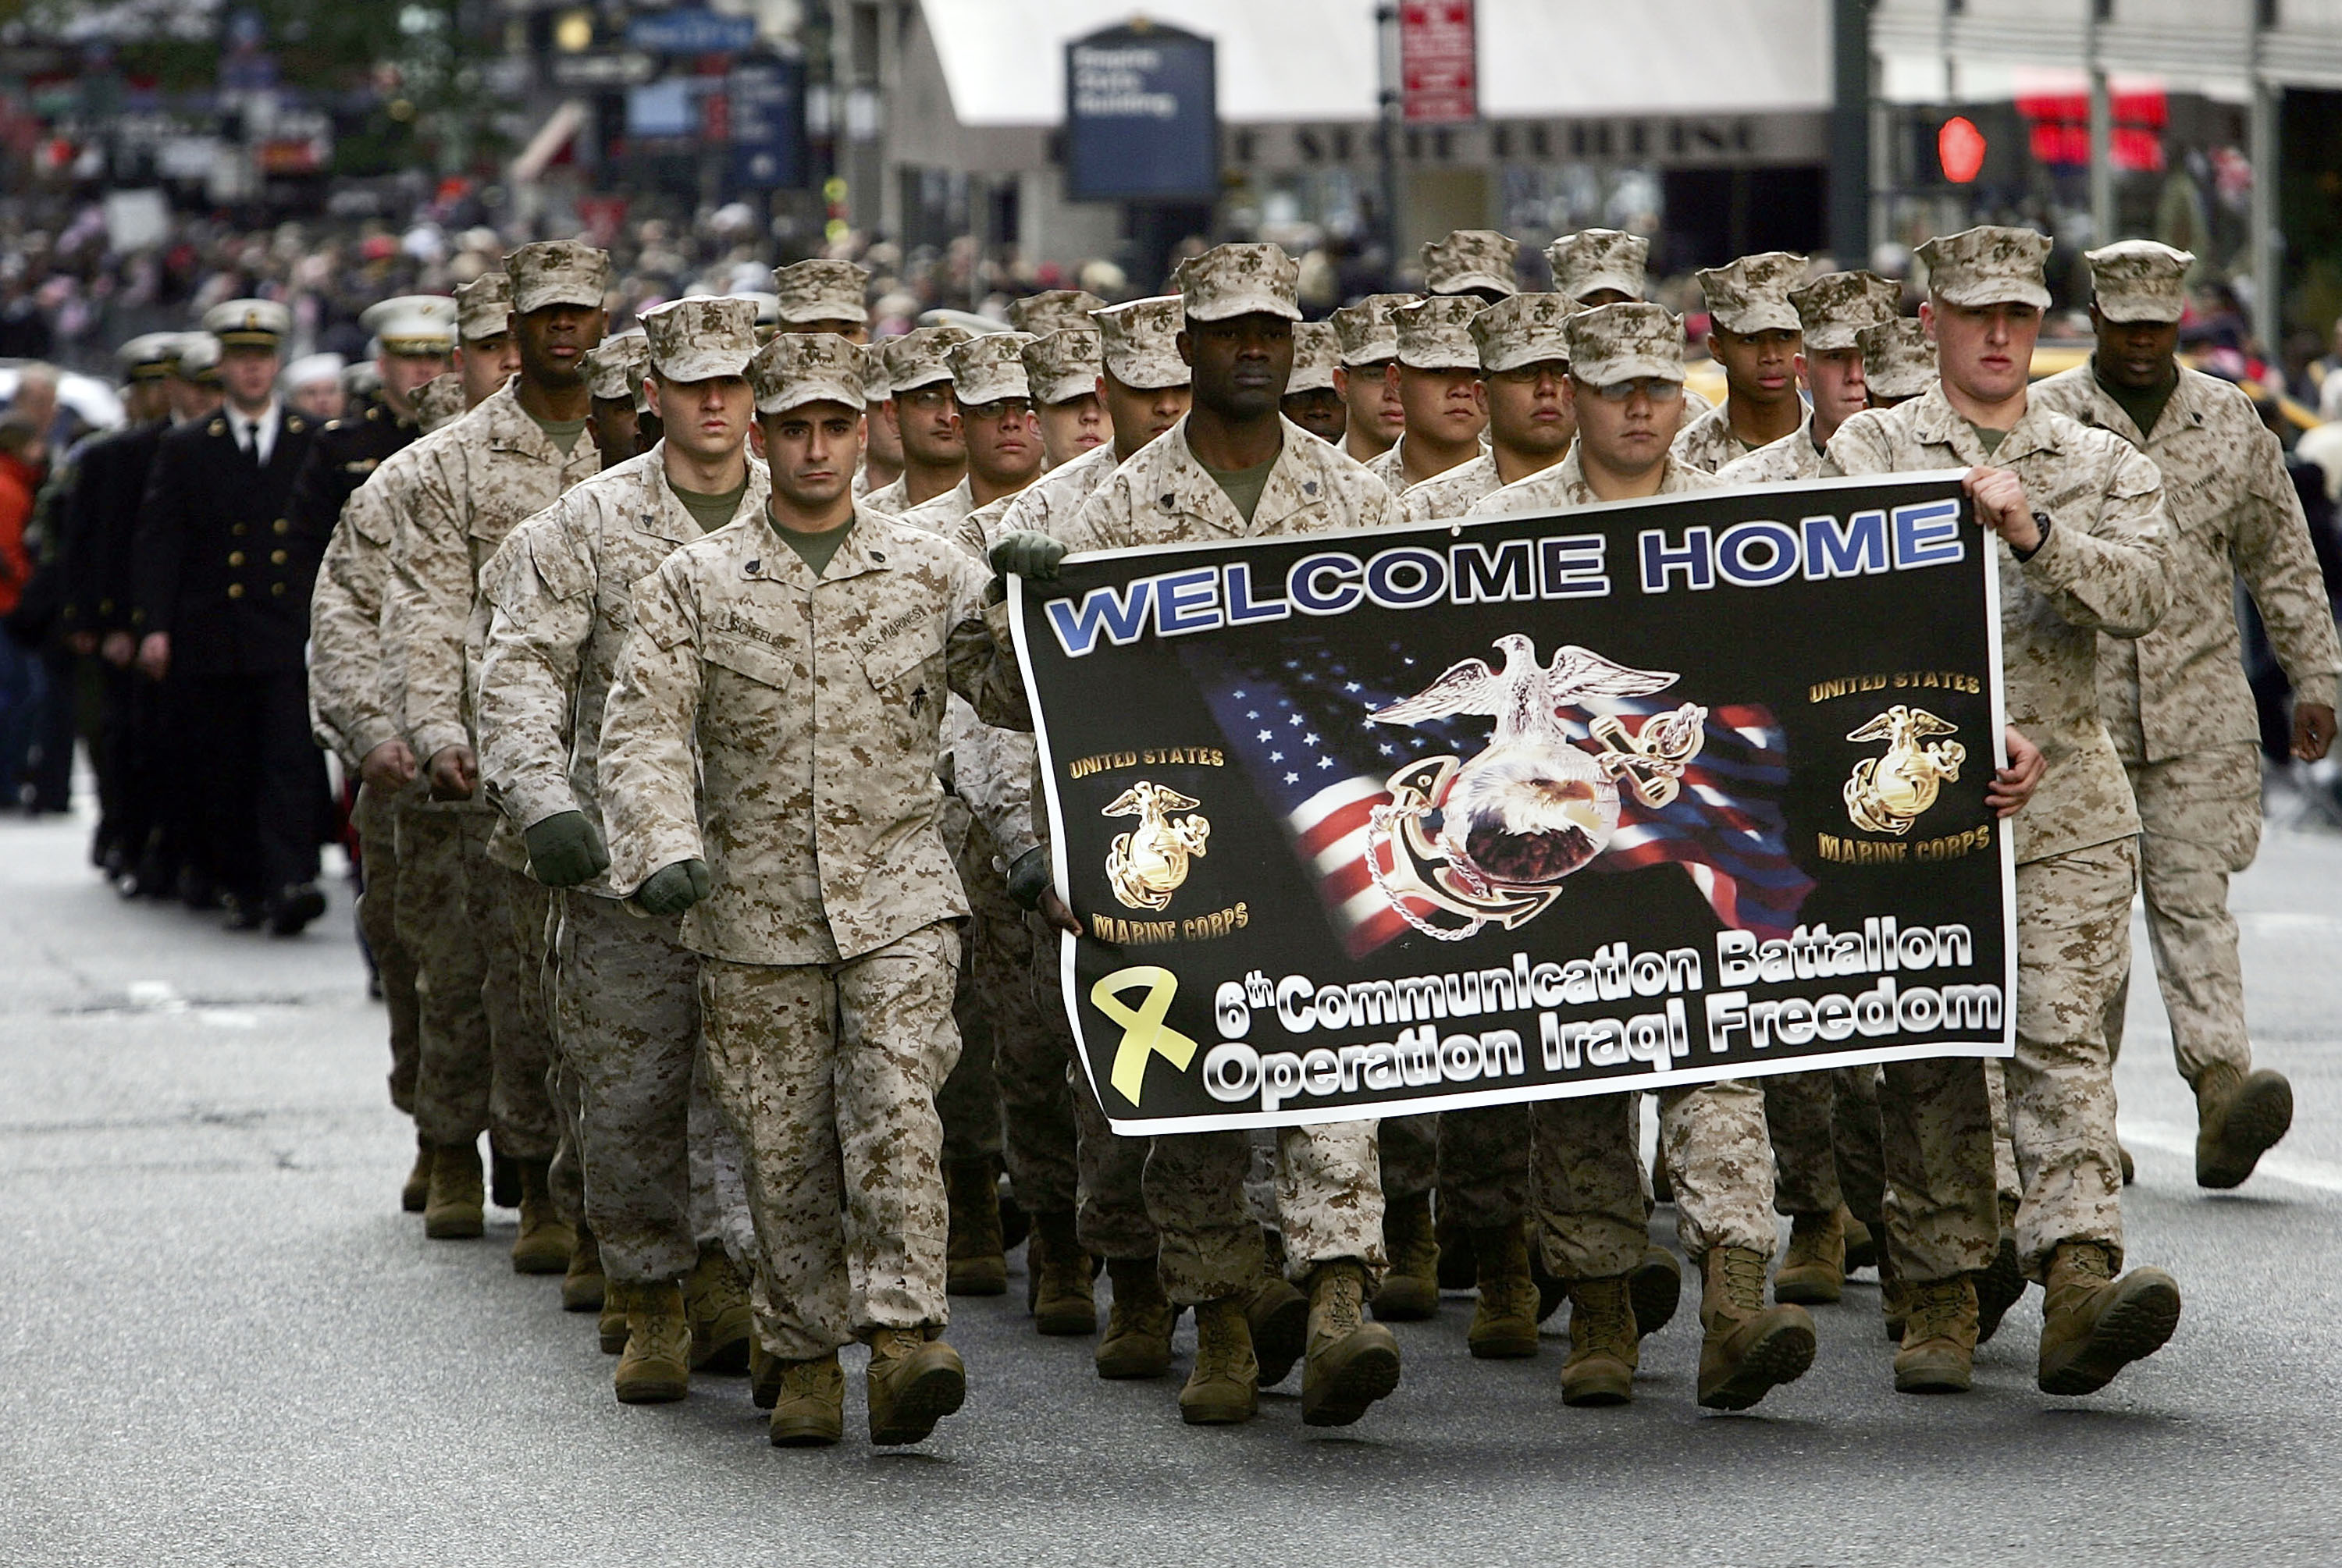 U.S. Marines March in the Veterans Day Parade 